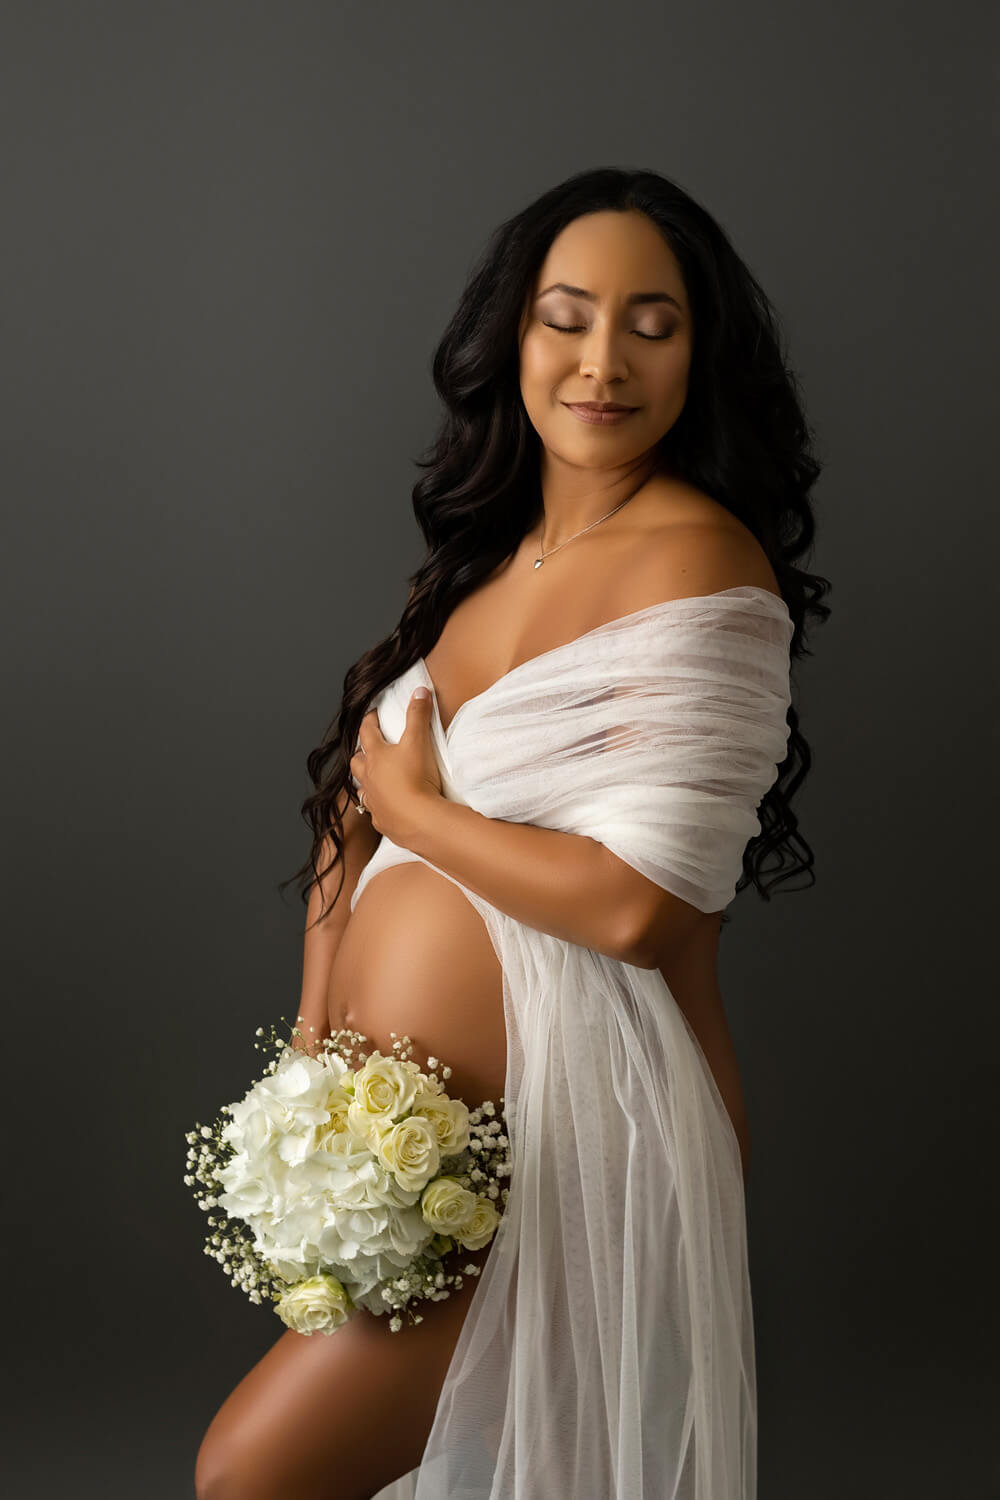 pregnant woman holding flowers for maternity pictures